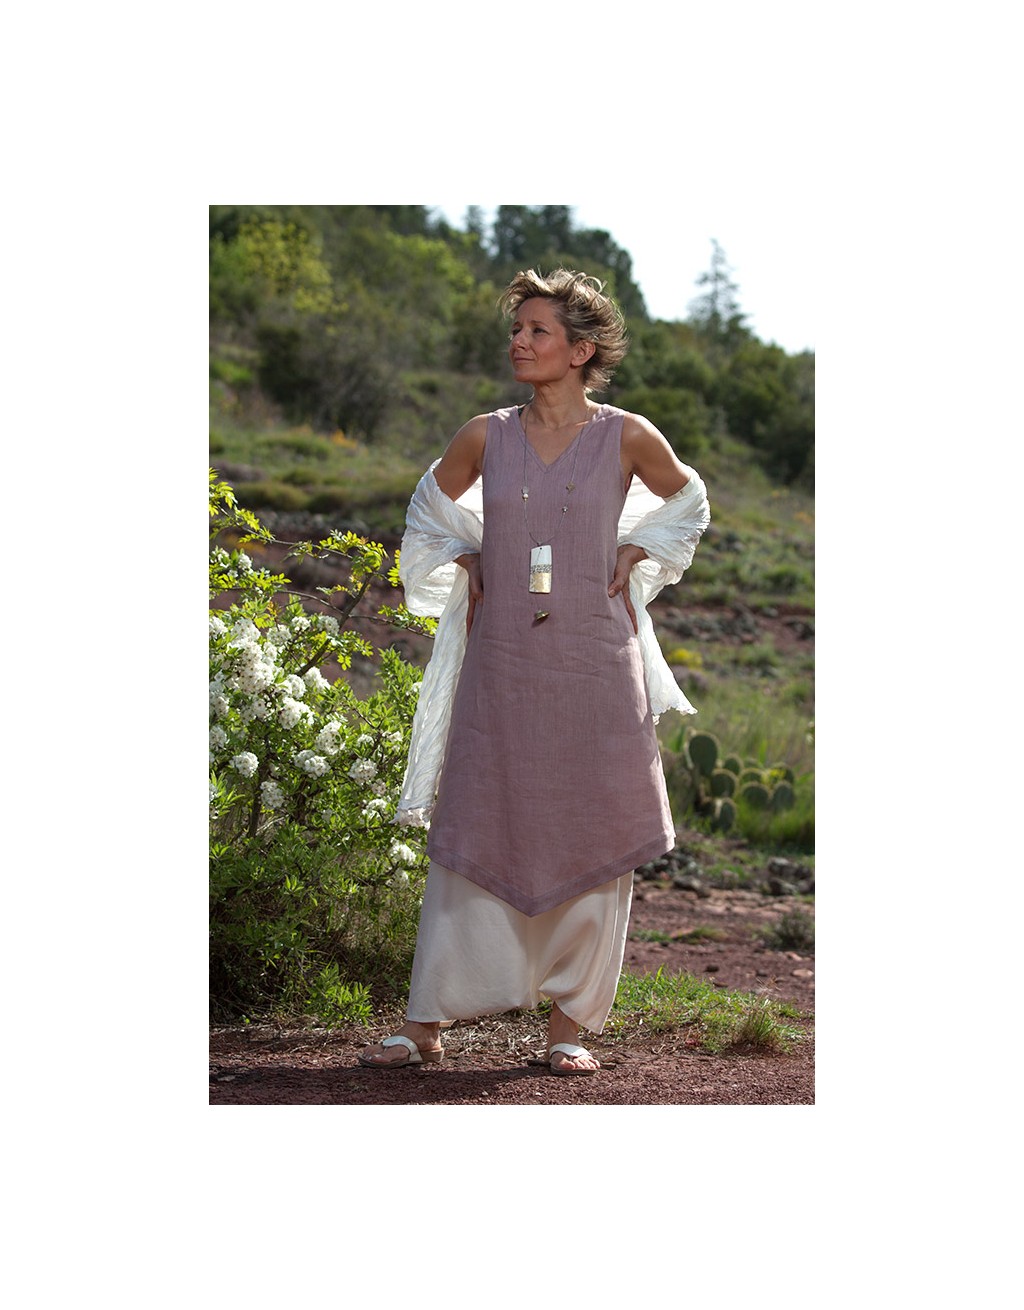 linen summer clothes: lilac color  tunic and sarouel-skirt